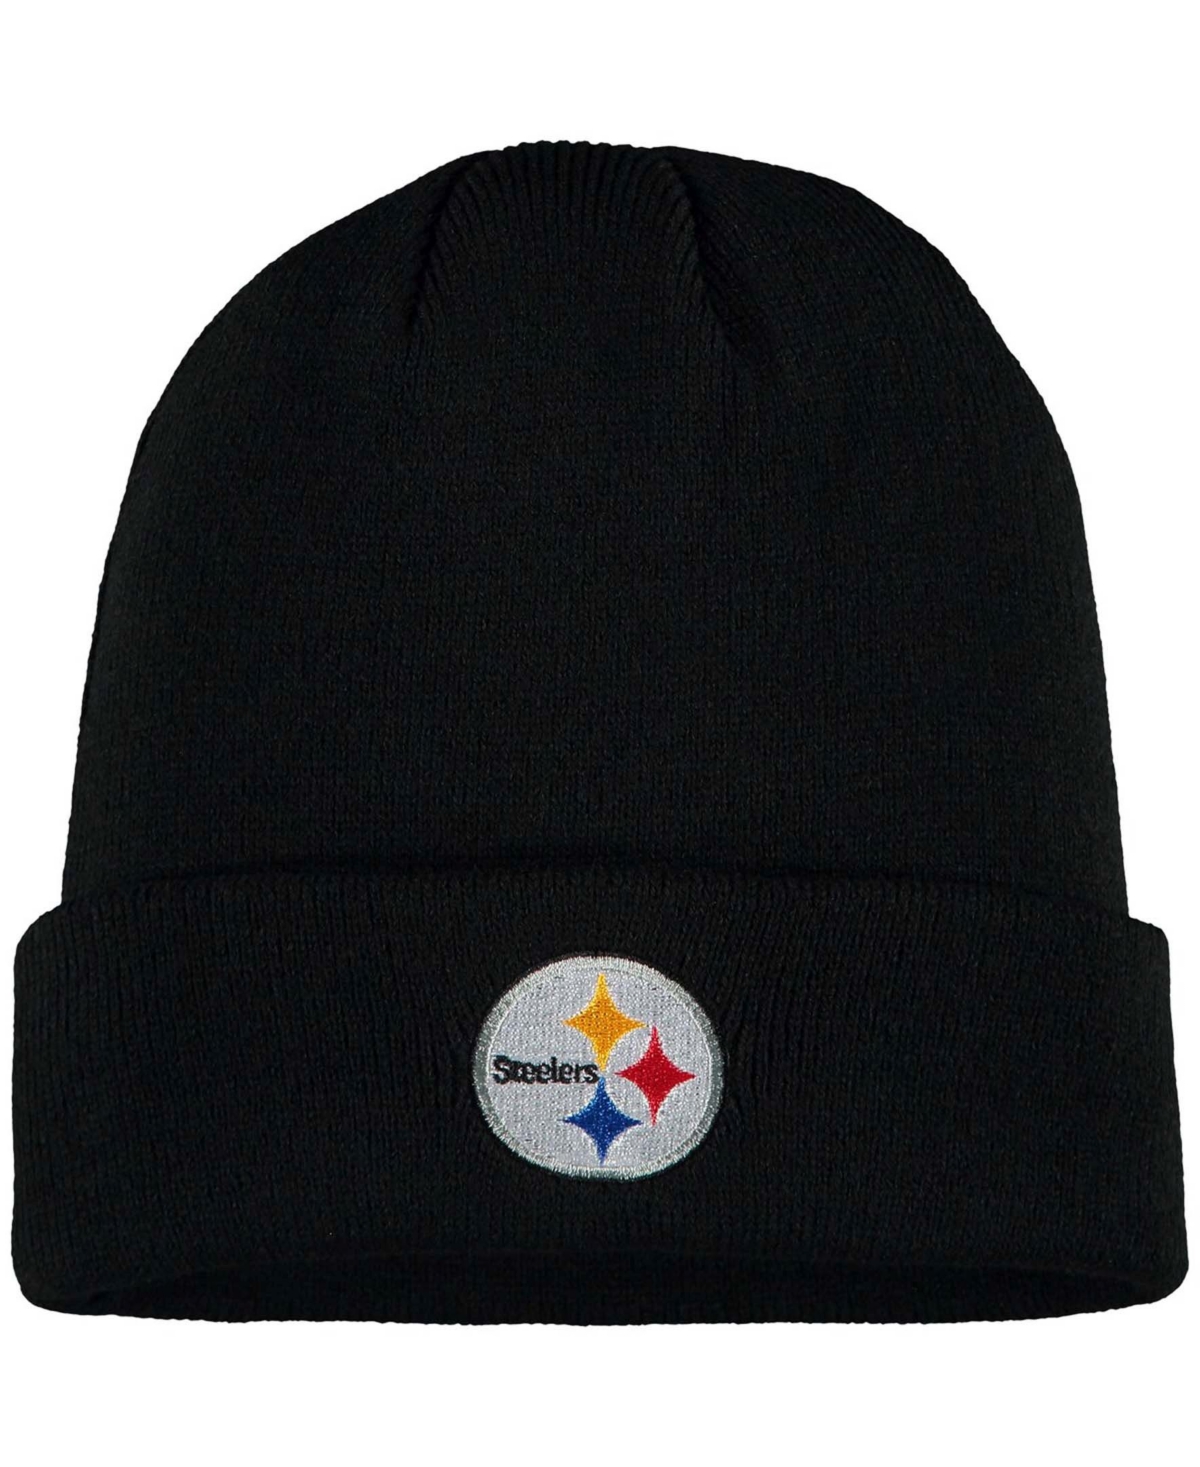 Shop Outerstuff Big Boys And Girls Black Pittsburgh Steelers Basic Cuffed Knit Hat